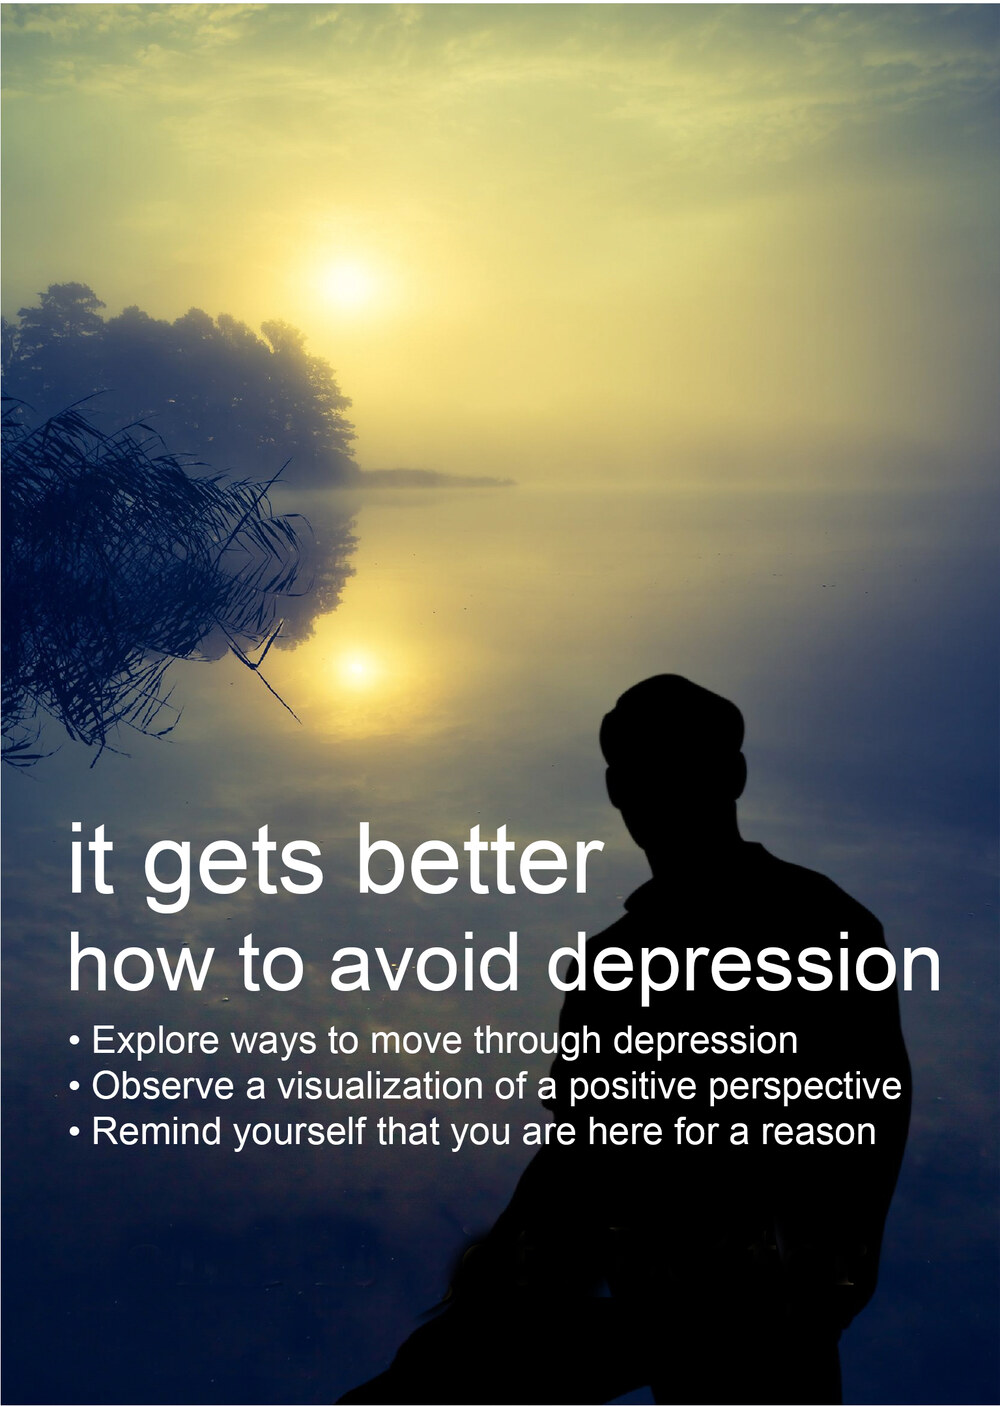 C73 - It Gets Better - How to Avoid Depression